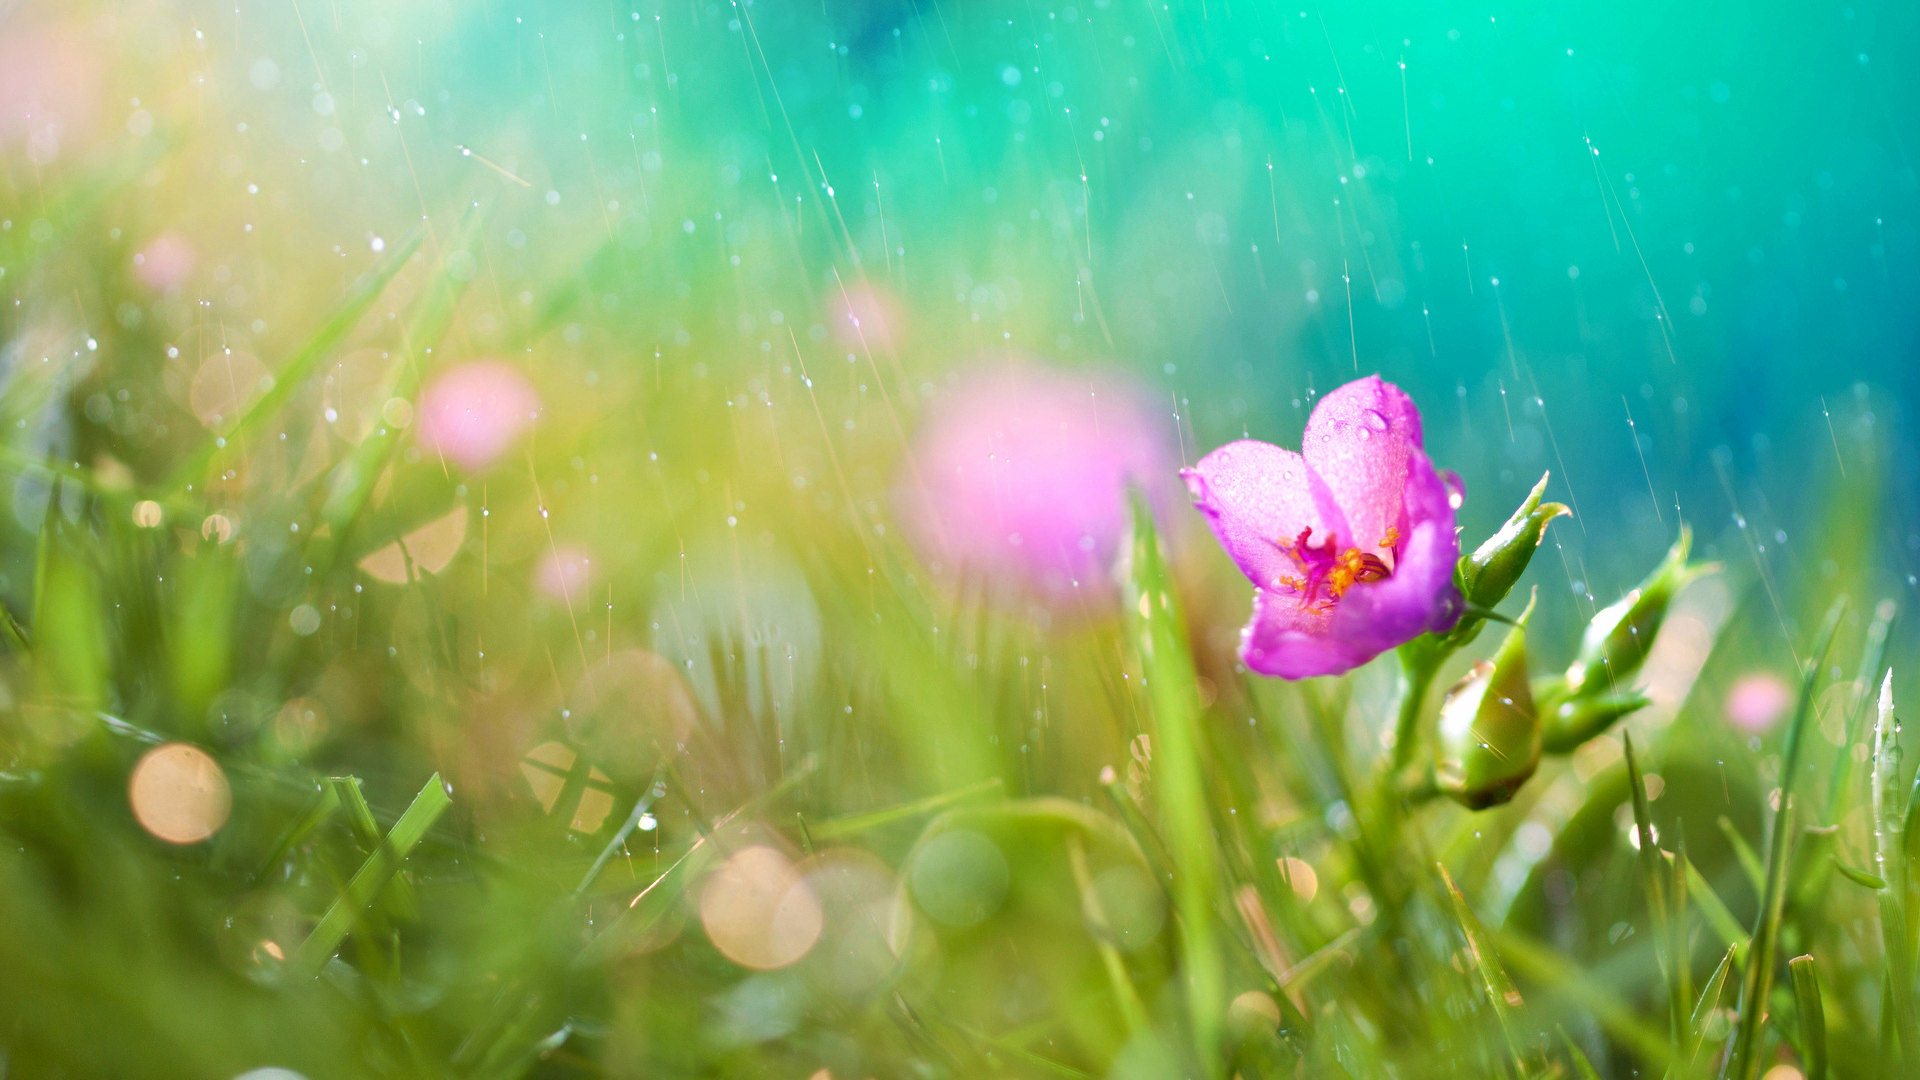 Rain Wallpaper HD Pictures Image Background